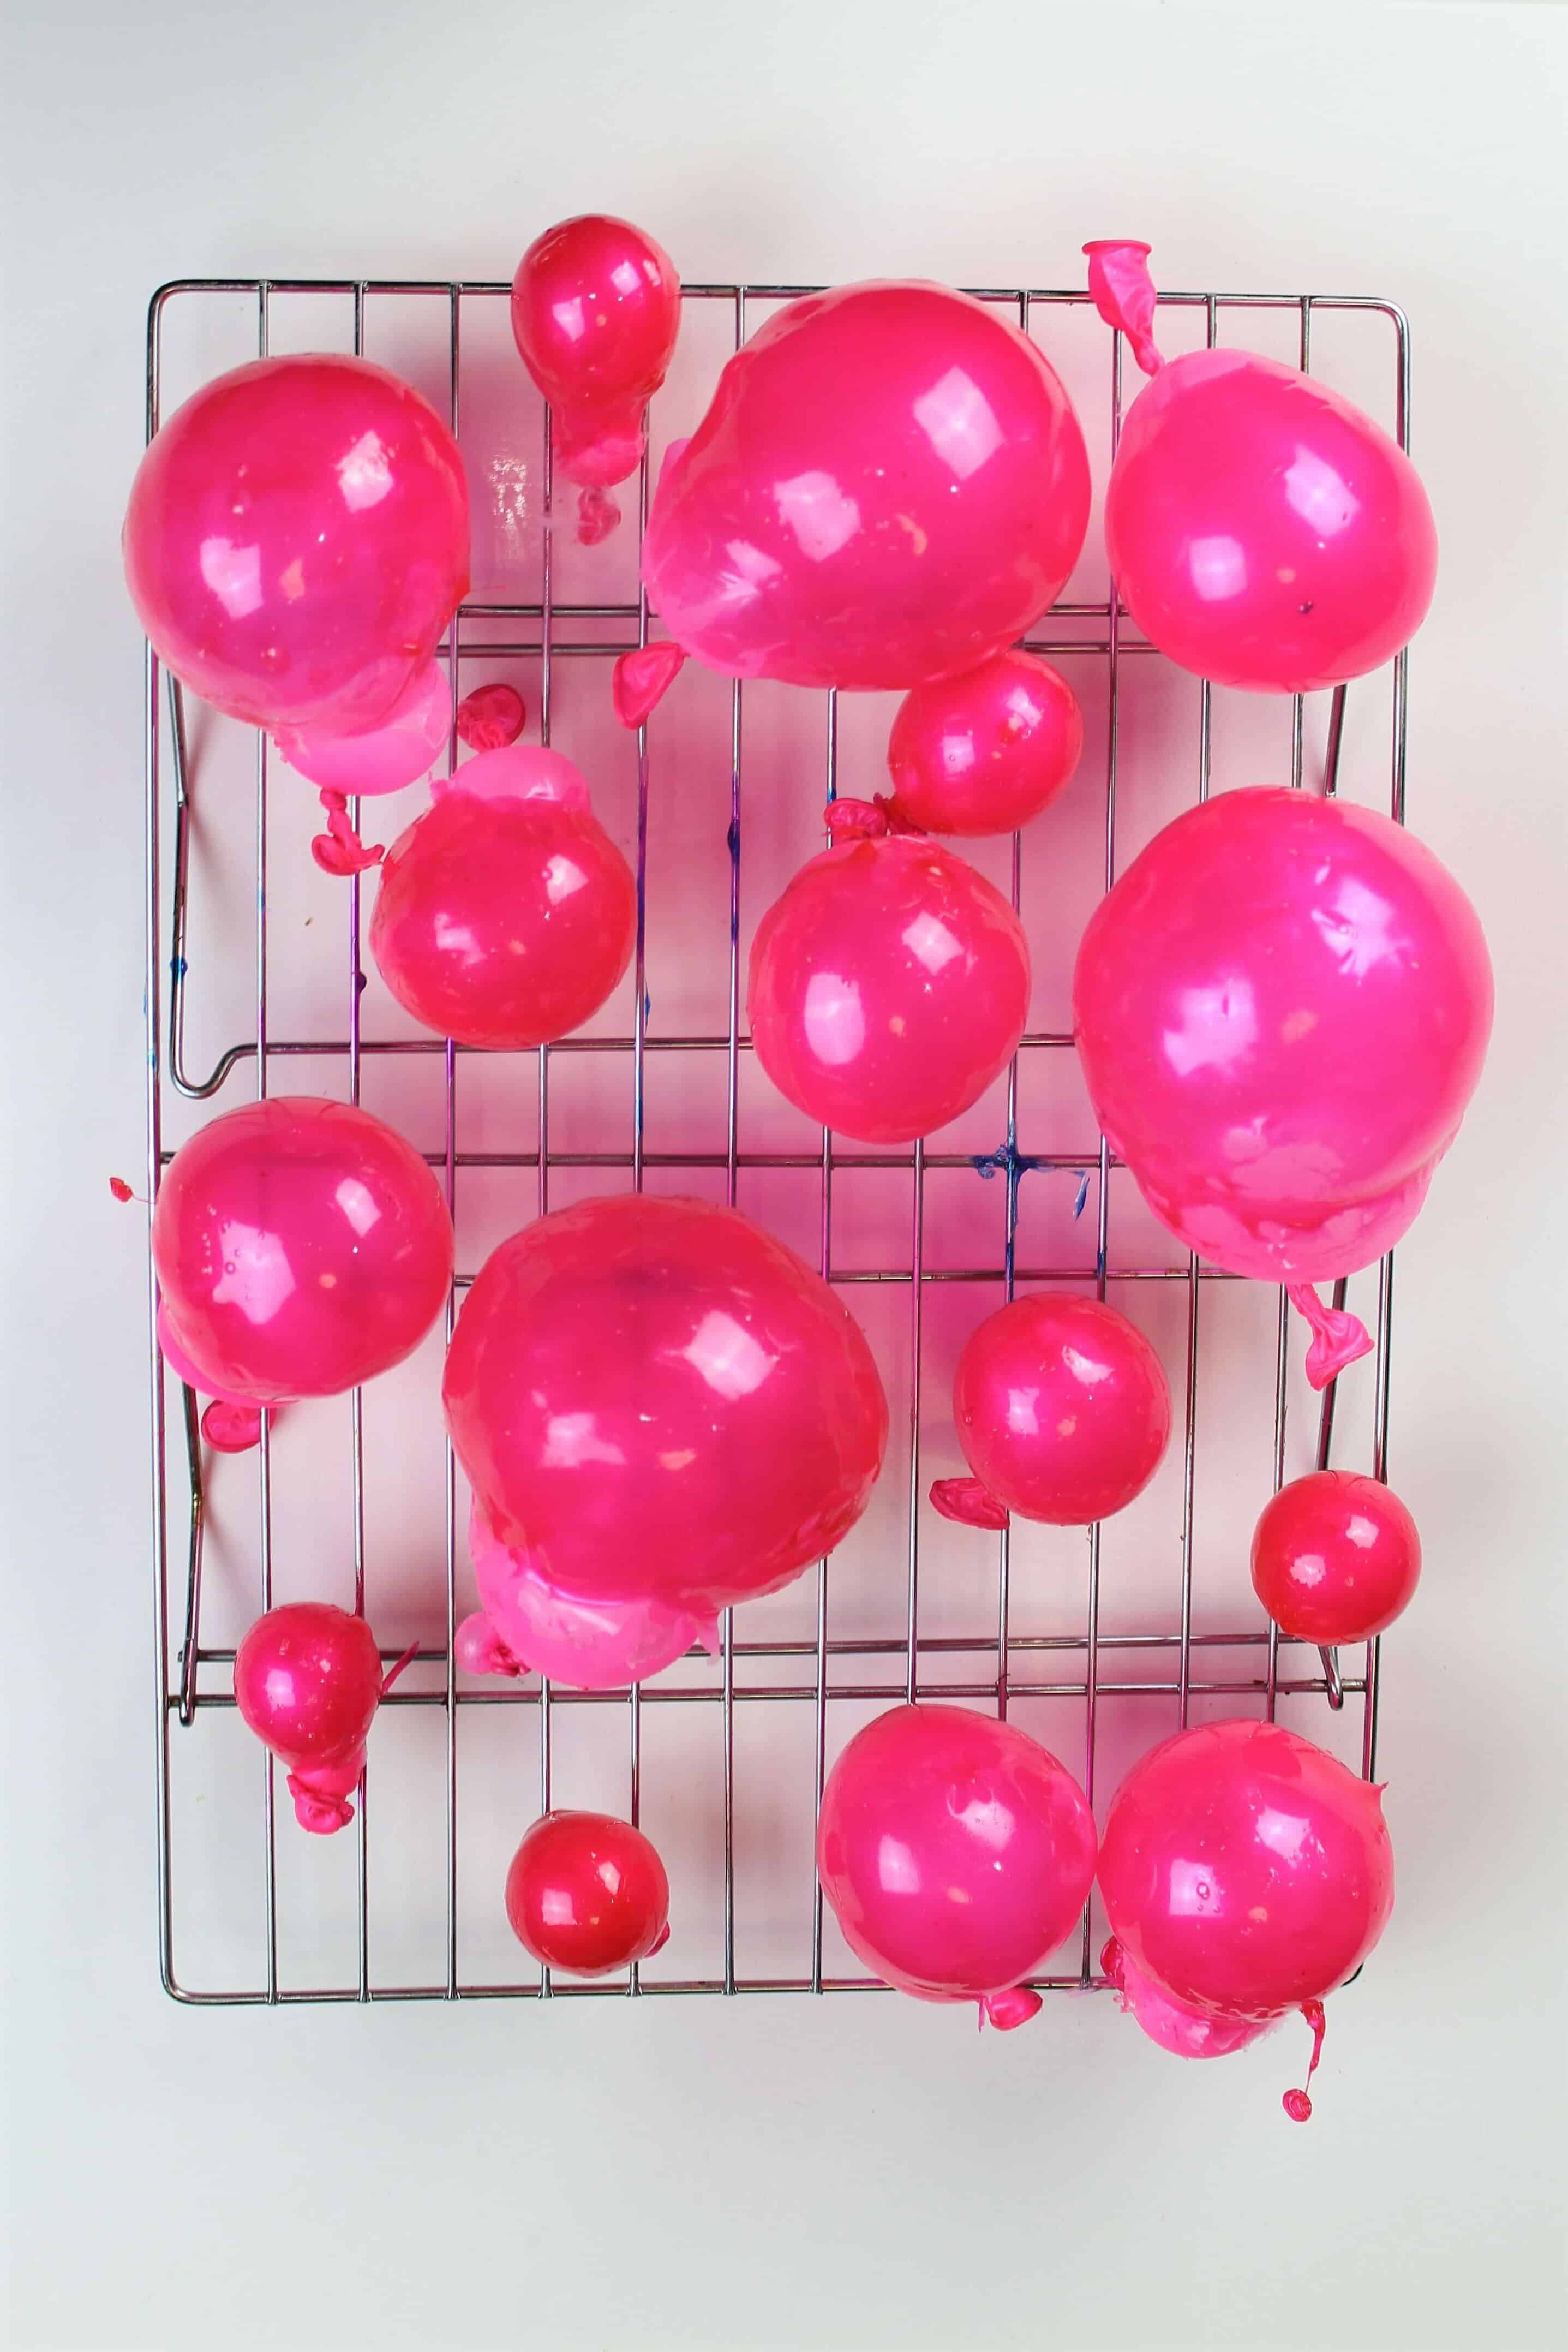 image of pink edible bubbles that have been made using gelatin and small balloons